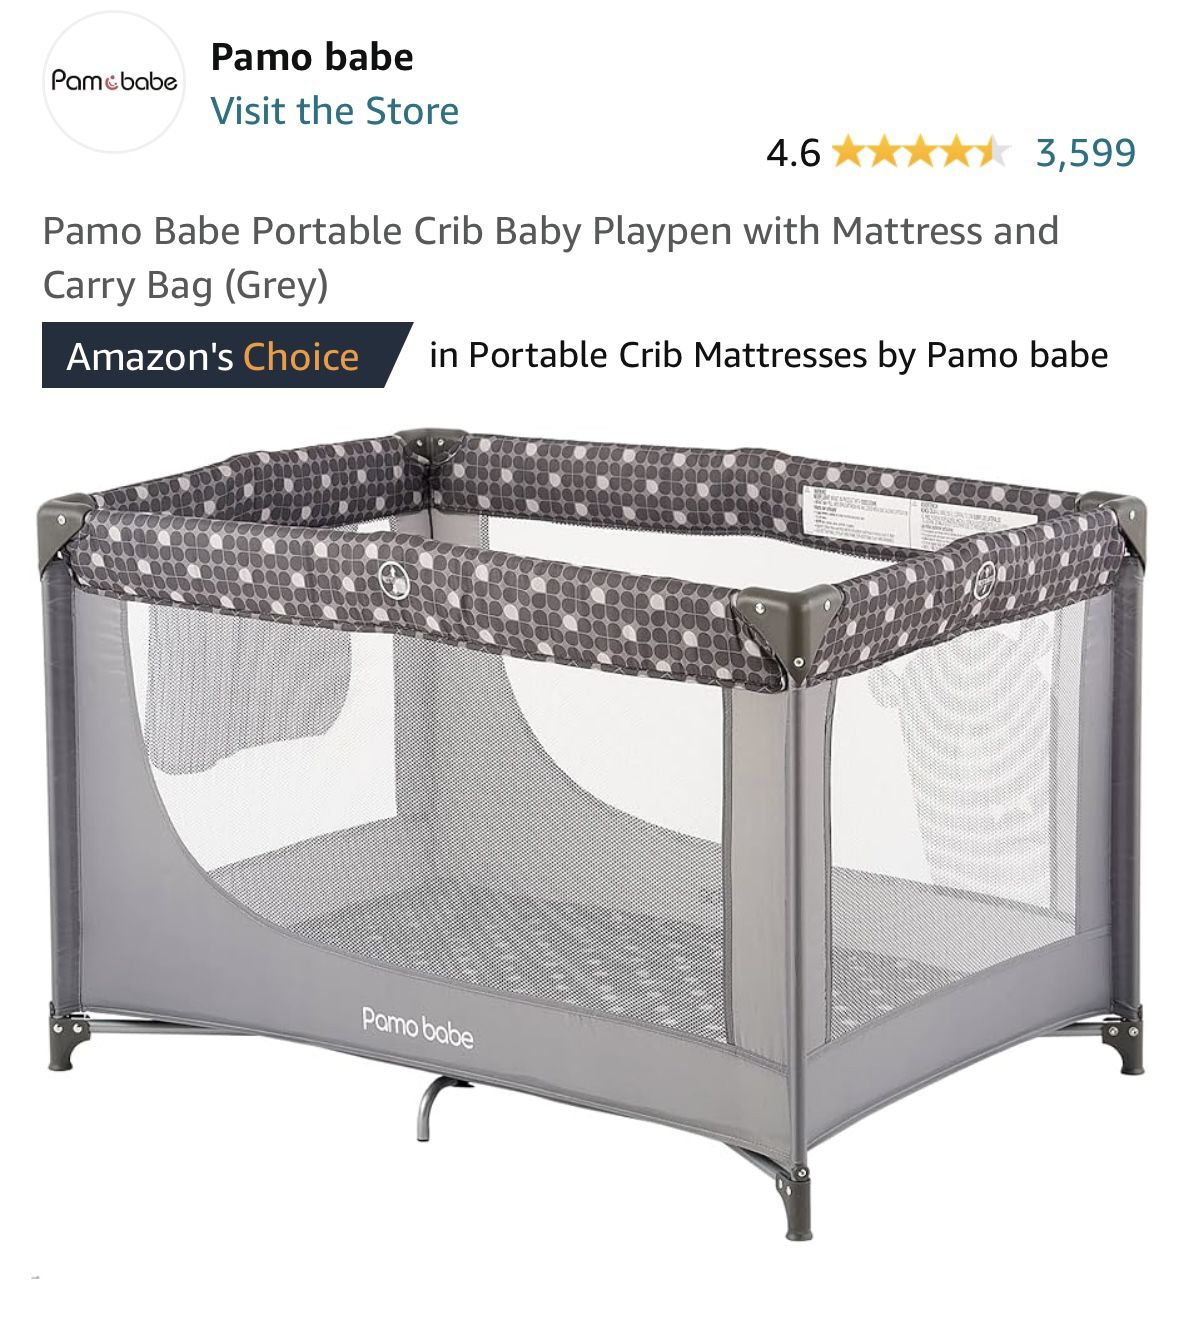 BRAND NEW PAMO BABE Portable Crib/Playpen with Mattress and Carry Bag (Grey)